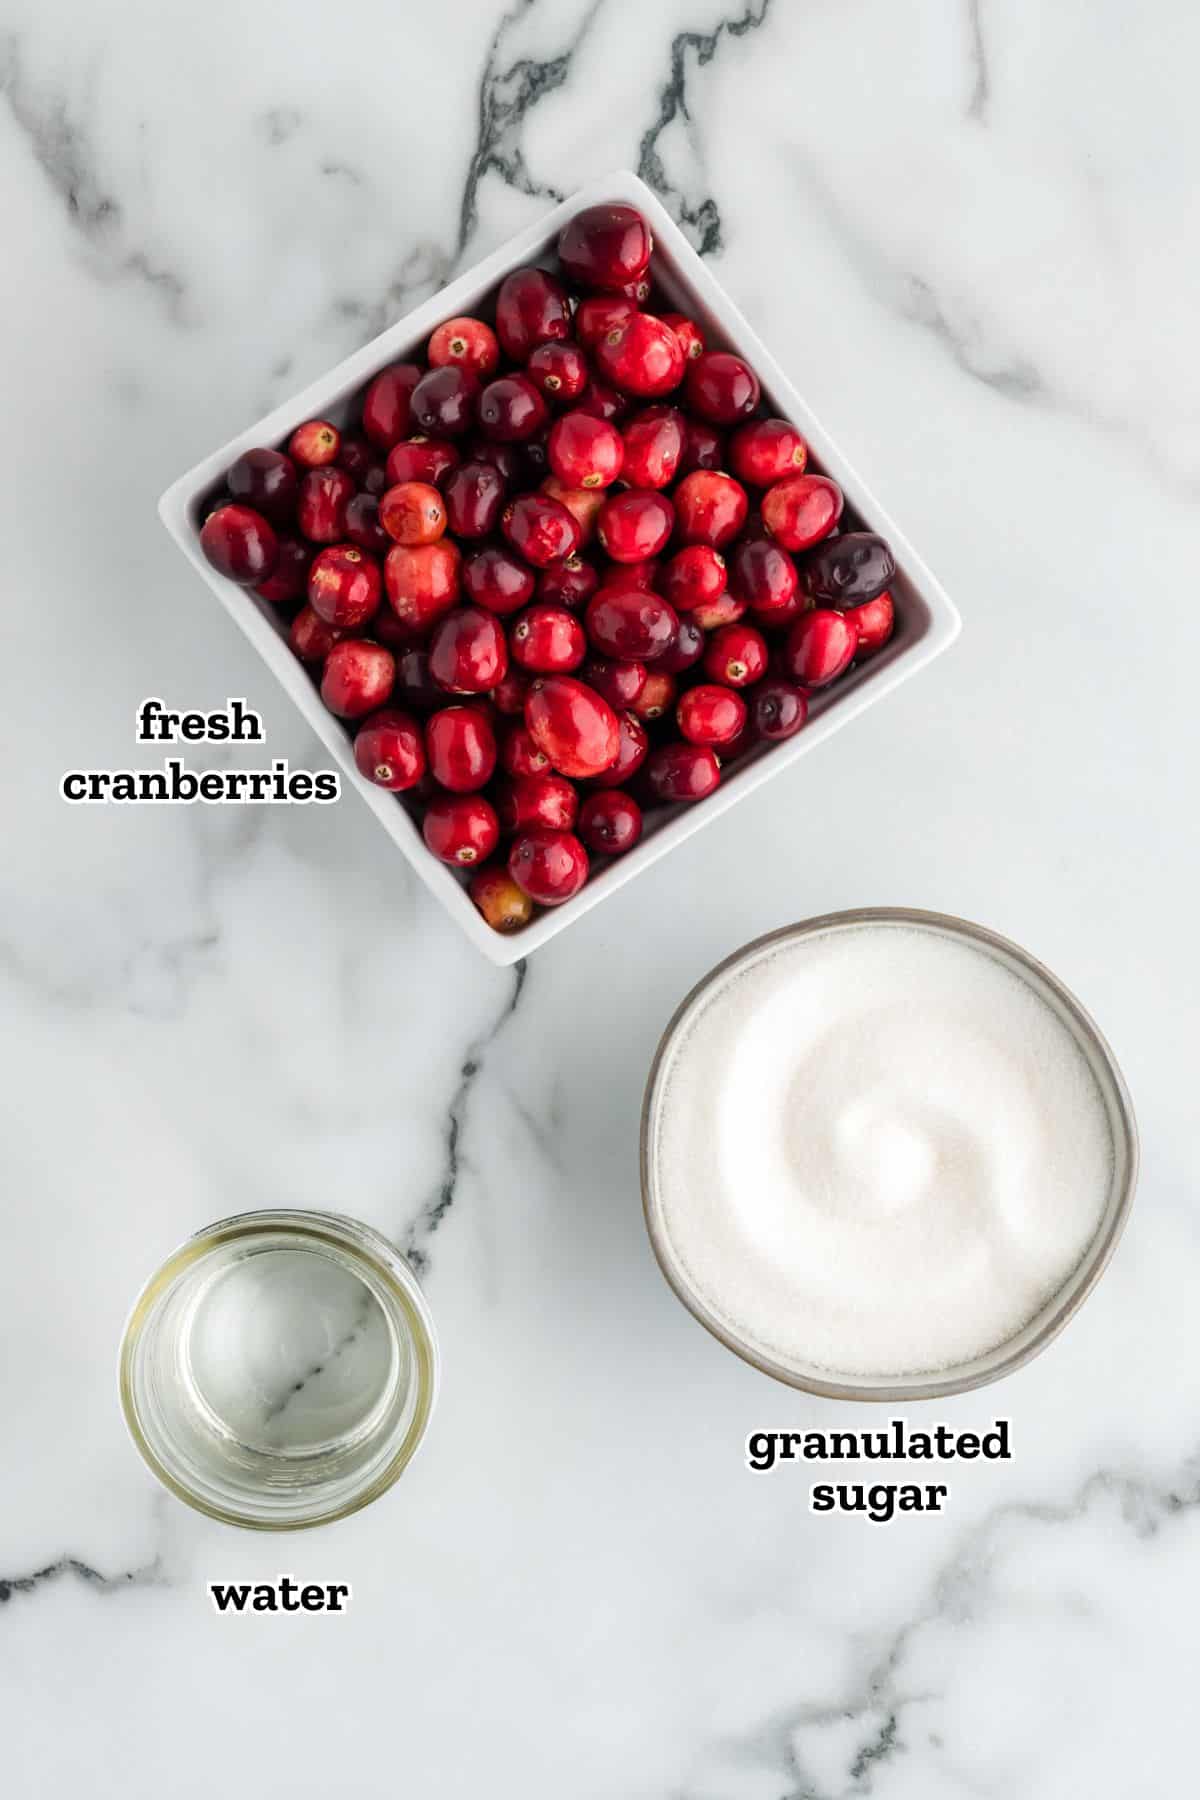 Labeled ingredients needed to make sugared cranberries.